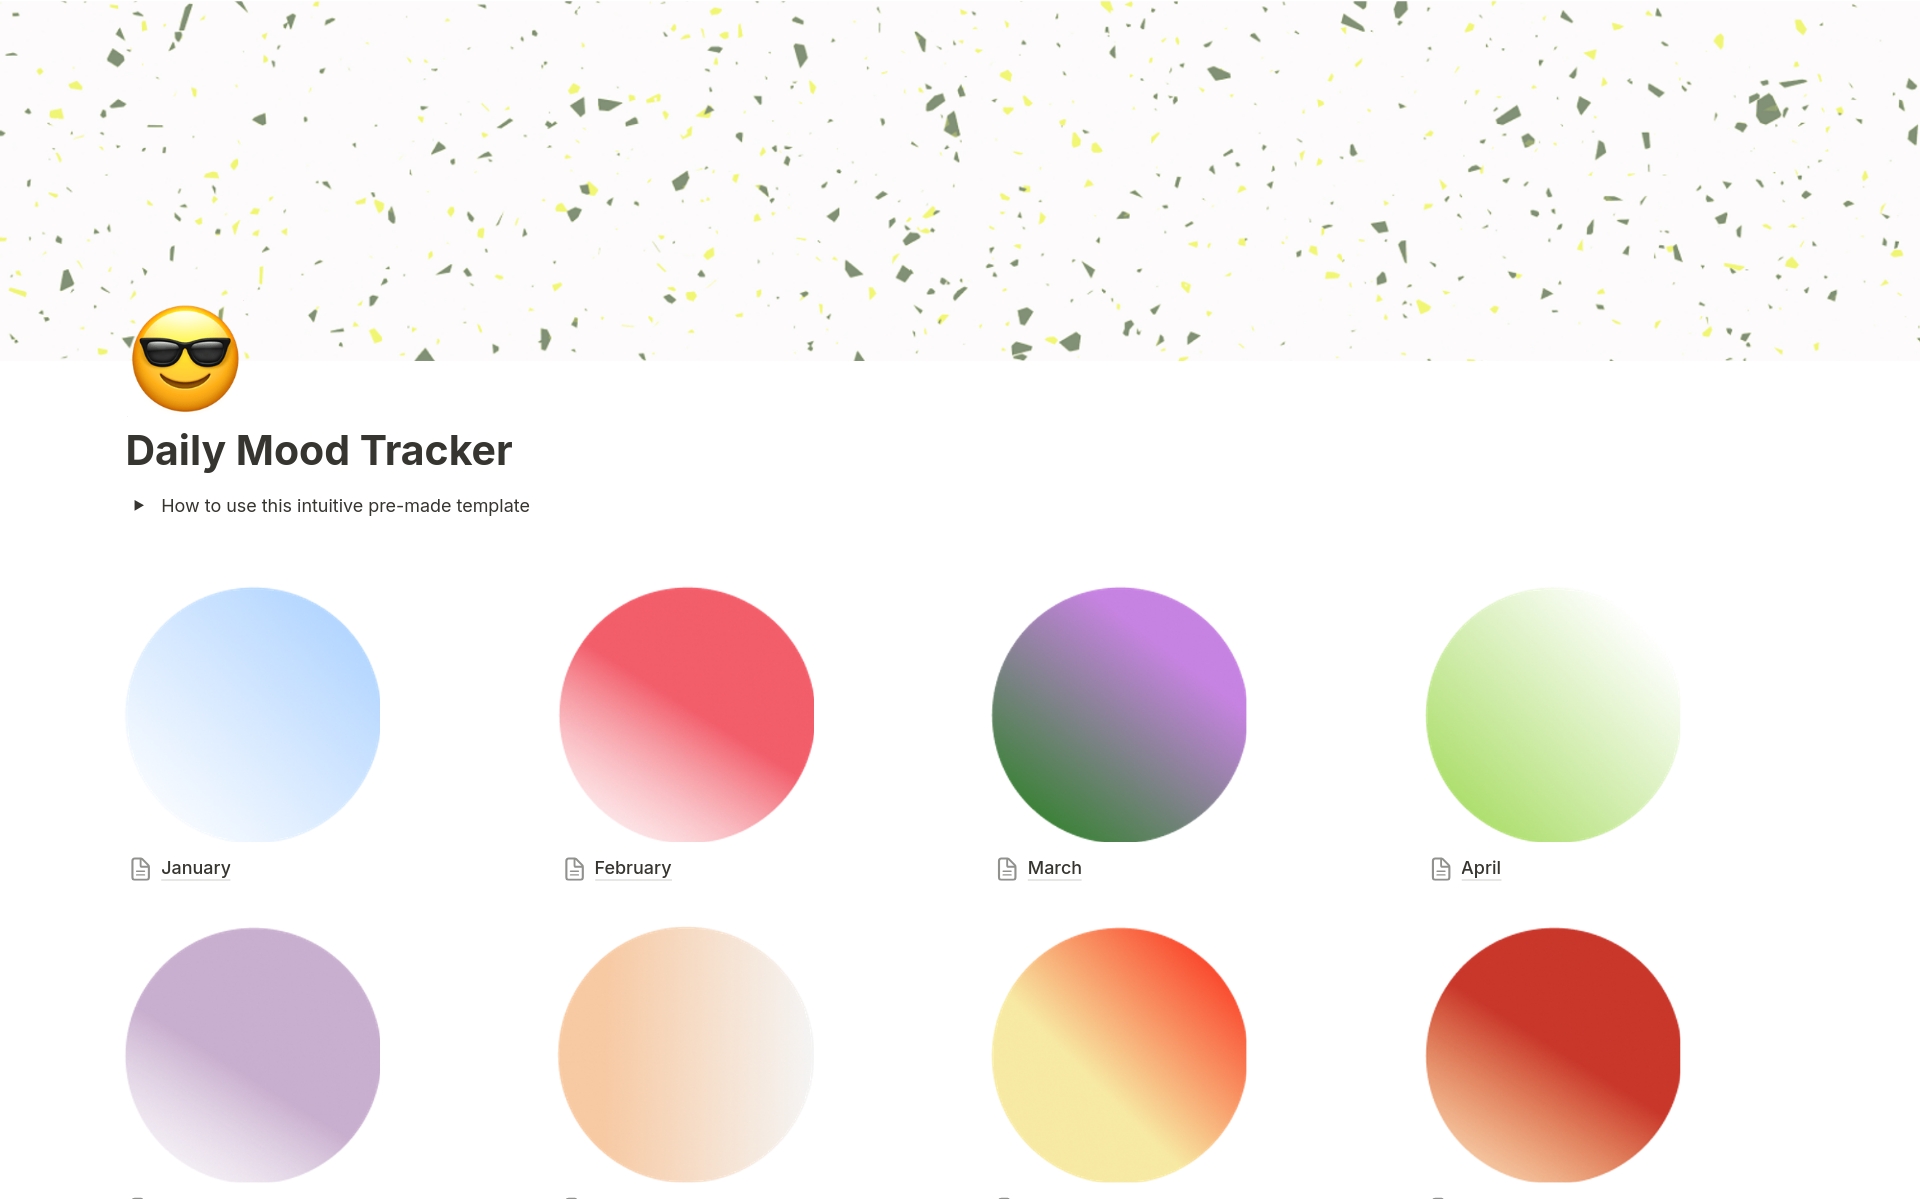 Track your daily mood for better living